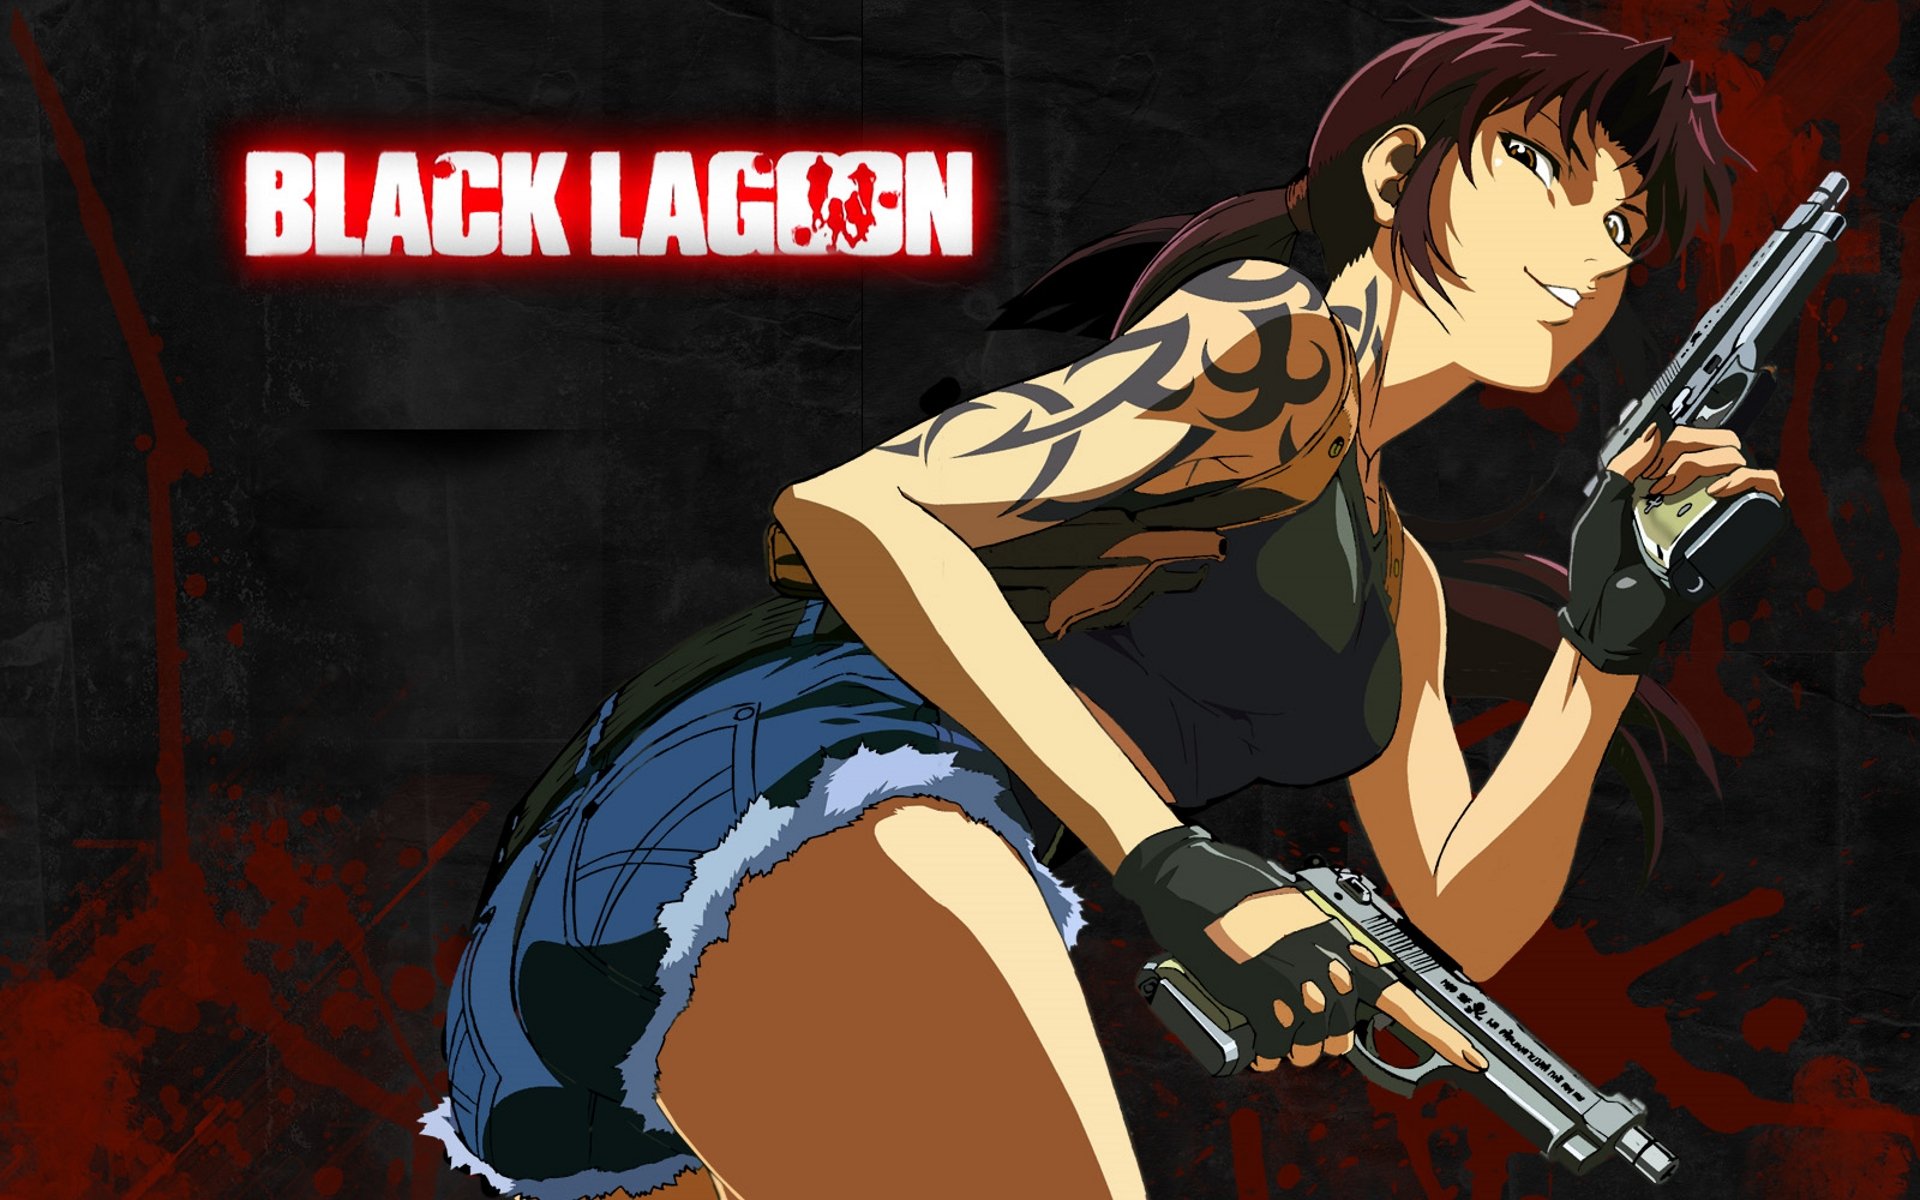 Anime Black Lagoon Revy Home Decor Poster Wall Scroll Cosplay Gift  60*90cm#EH546 | eBay